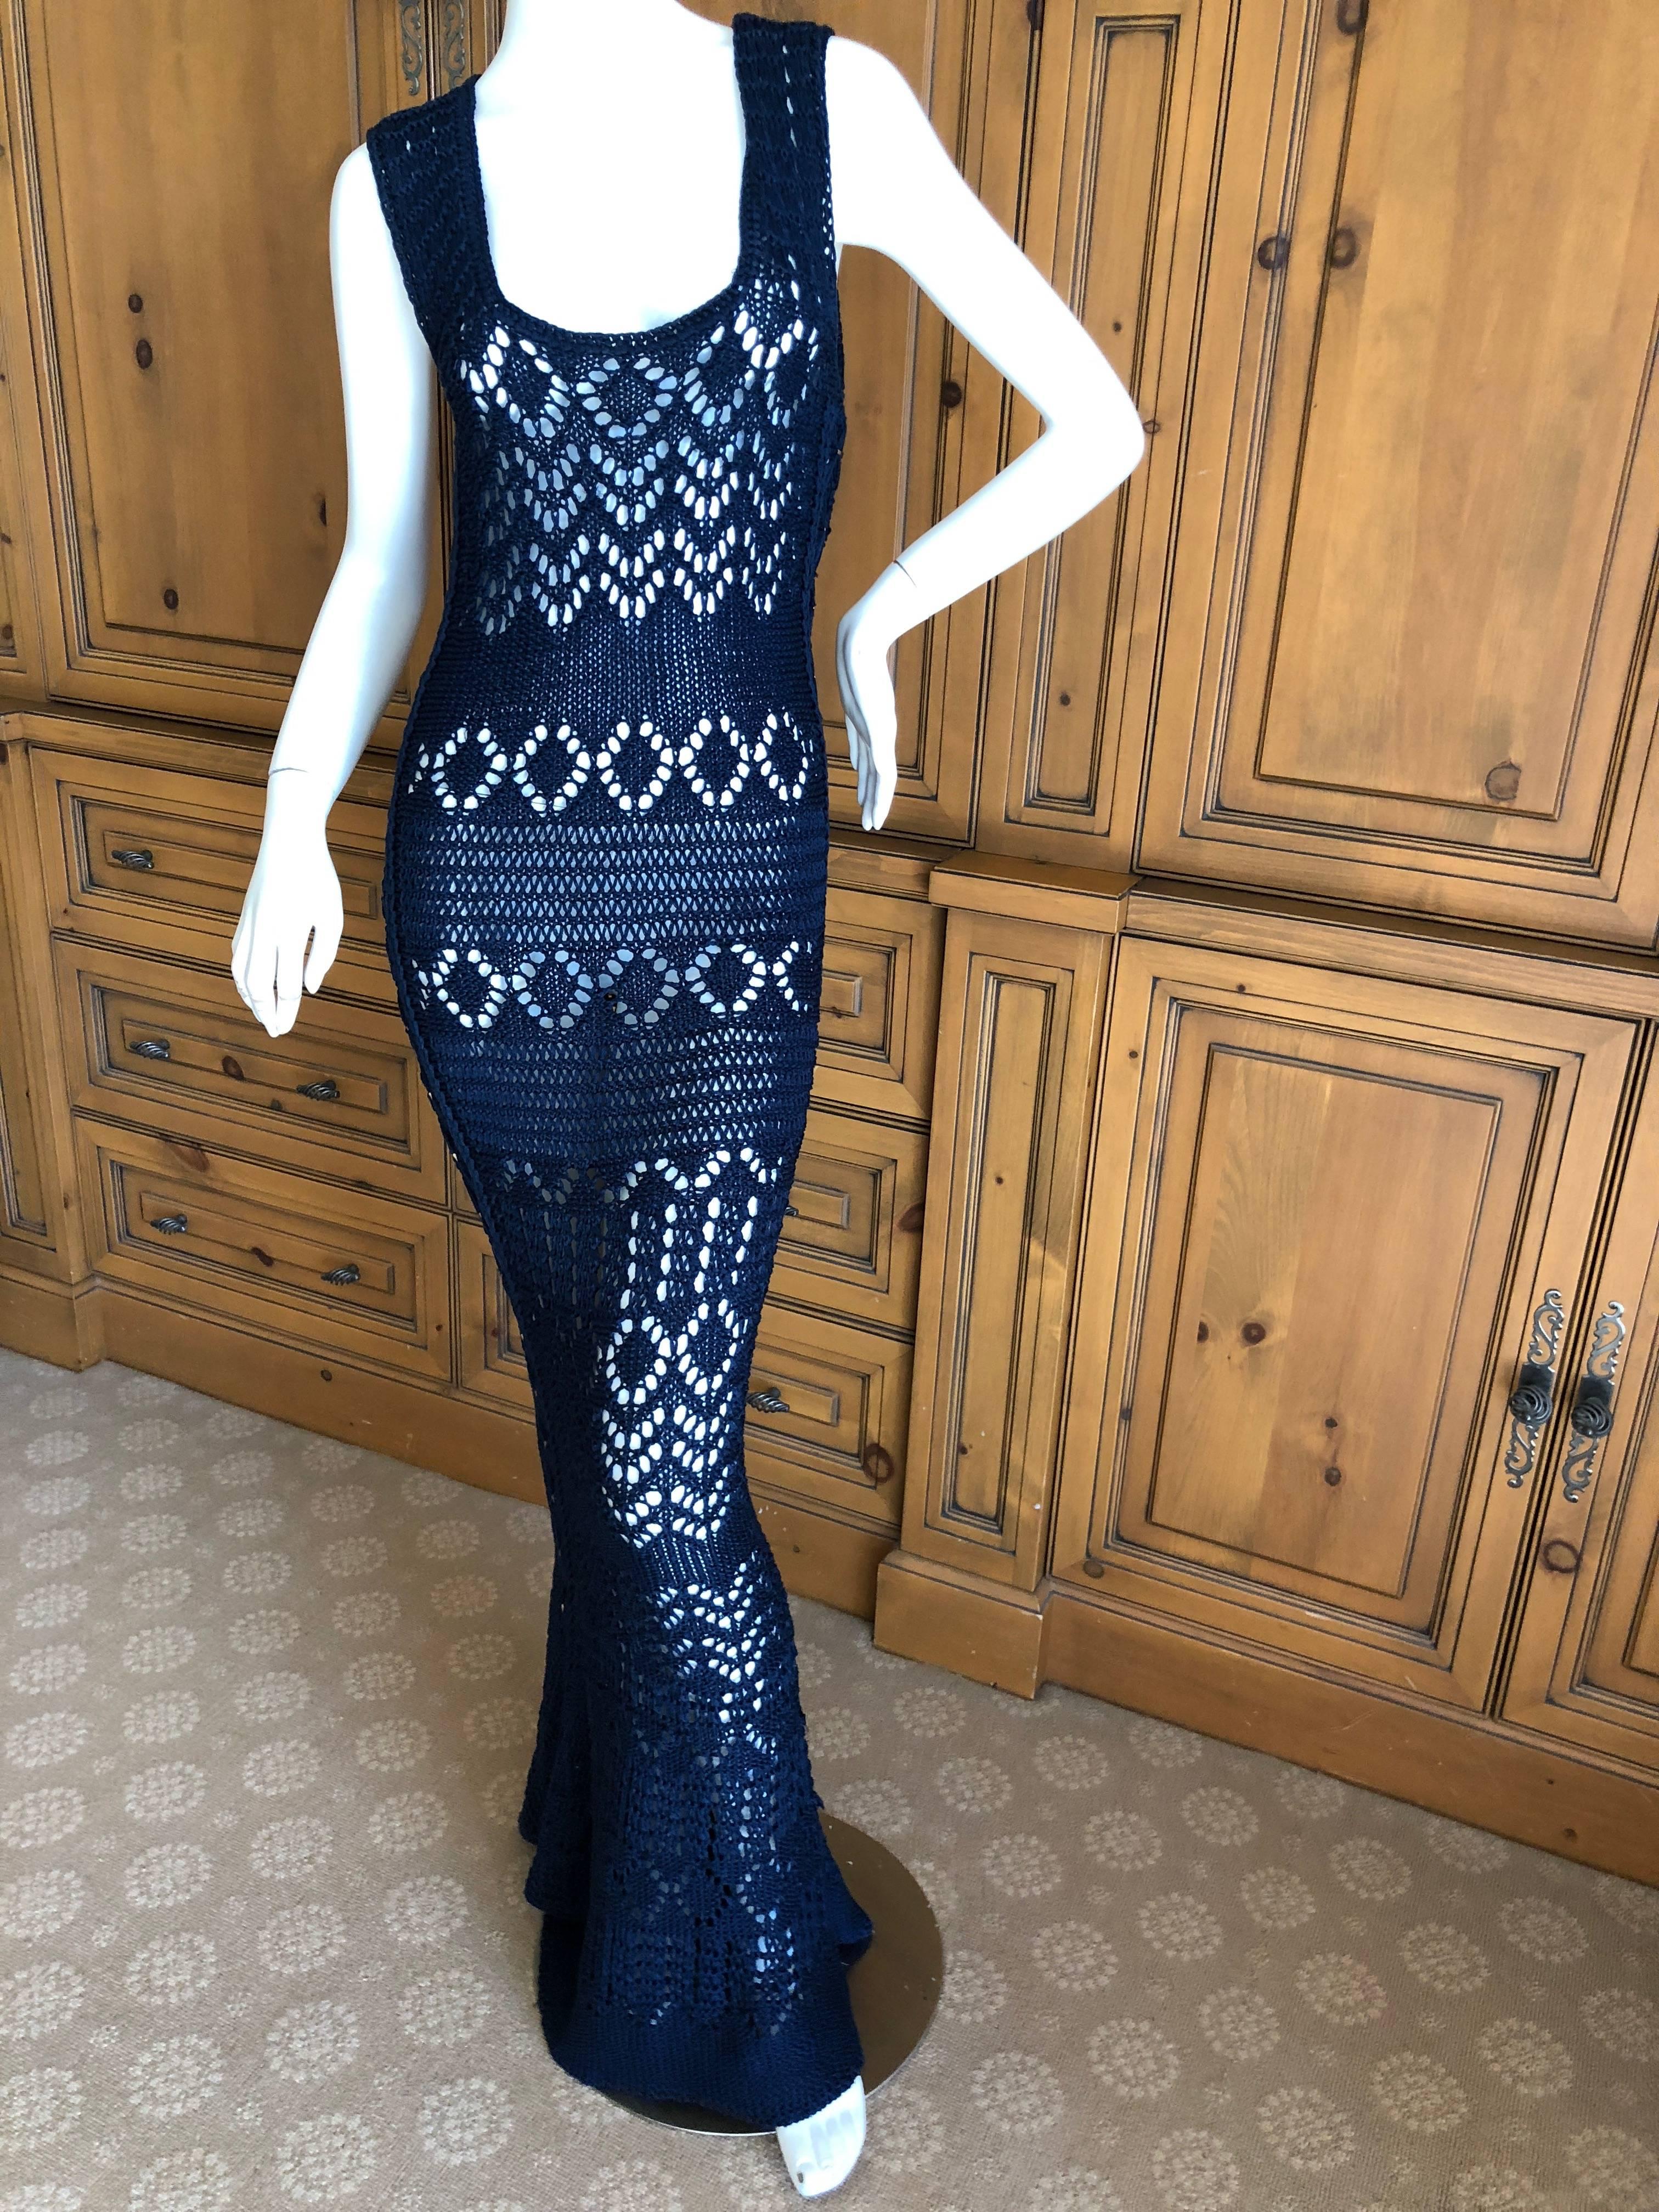 Emilio Pucci Navy Blue Crochet Knit Evening Dress In Excellent Condition For Sale In Cloverdale, CA